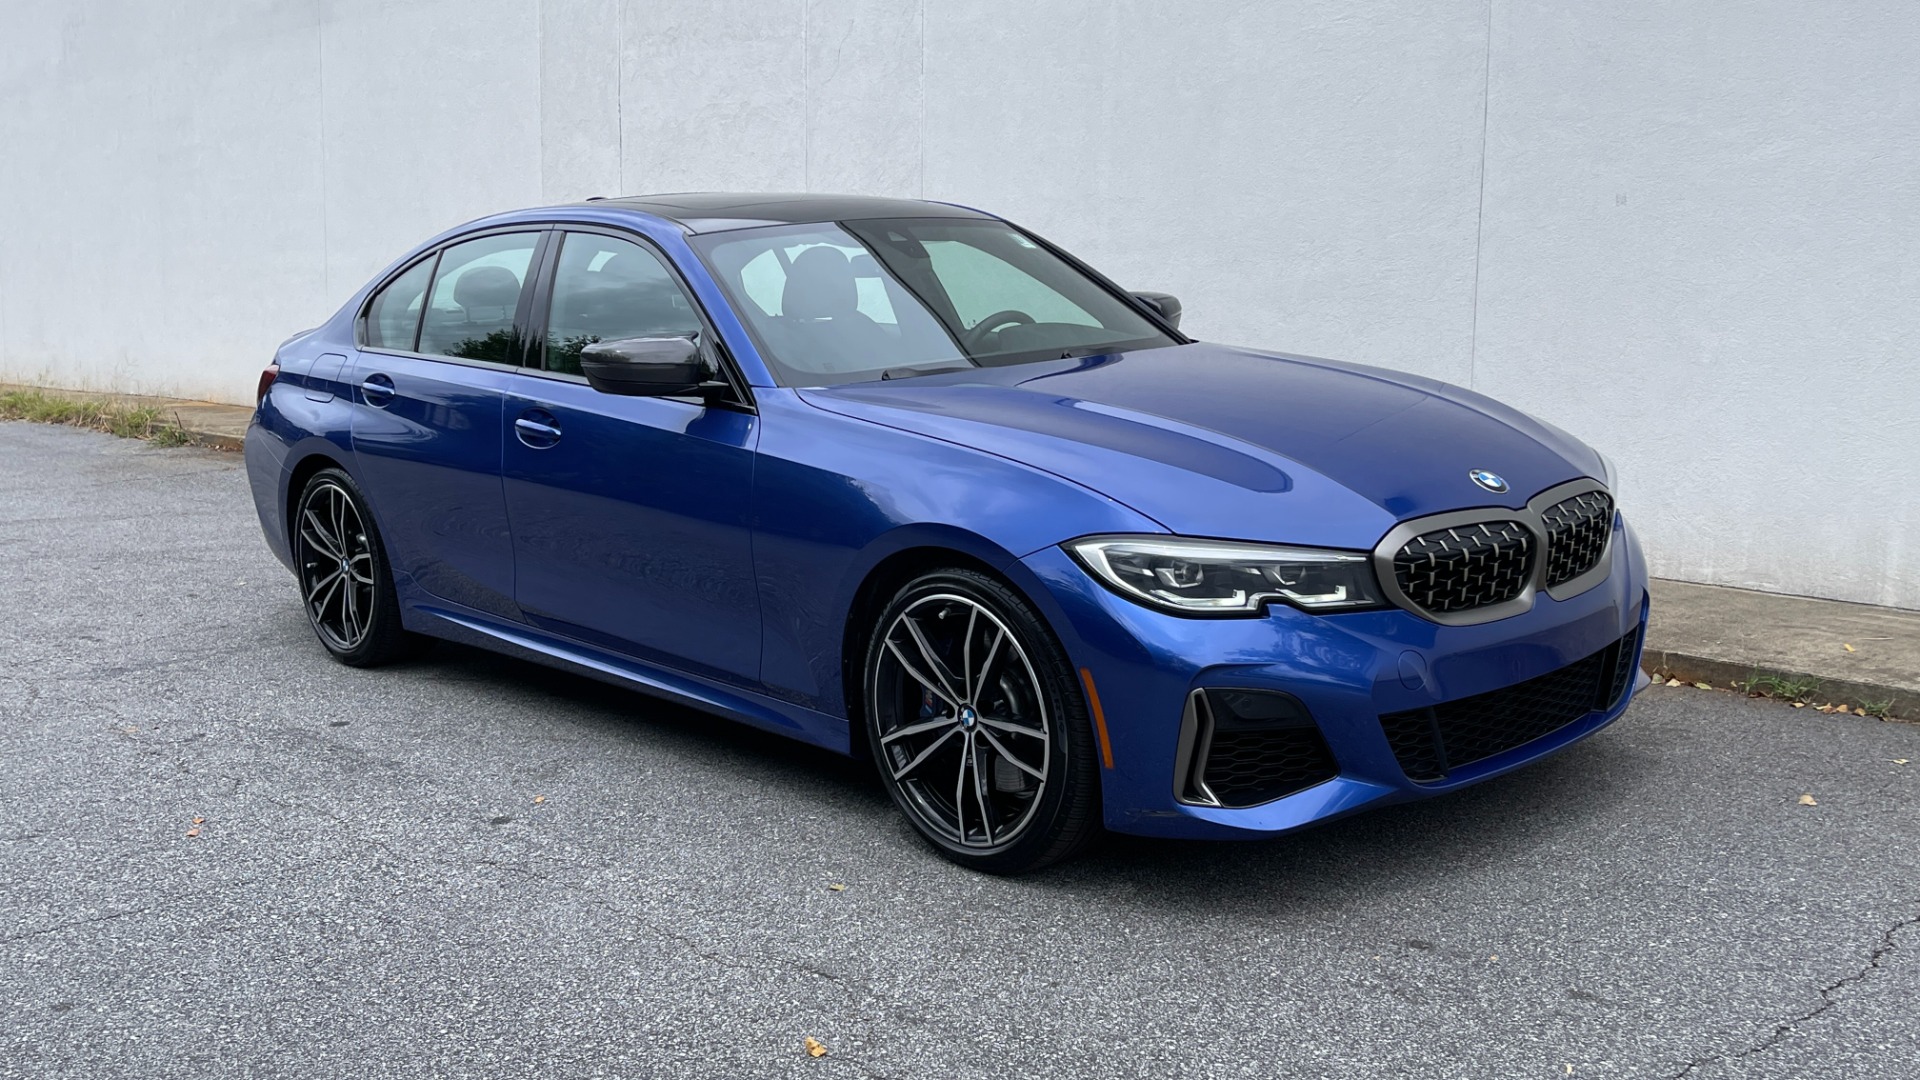 Used 2021 BMW 3 Series M340i / REMOTE START / DRIVING ASSISTANCE / 19IN WHEELS / INTAKE SYSTEM for sale $52,995 at Formula Imports in Charlotte NC 28227 5